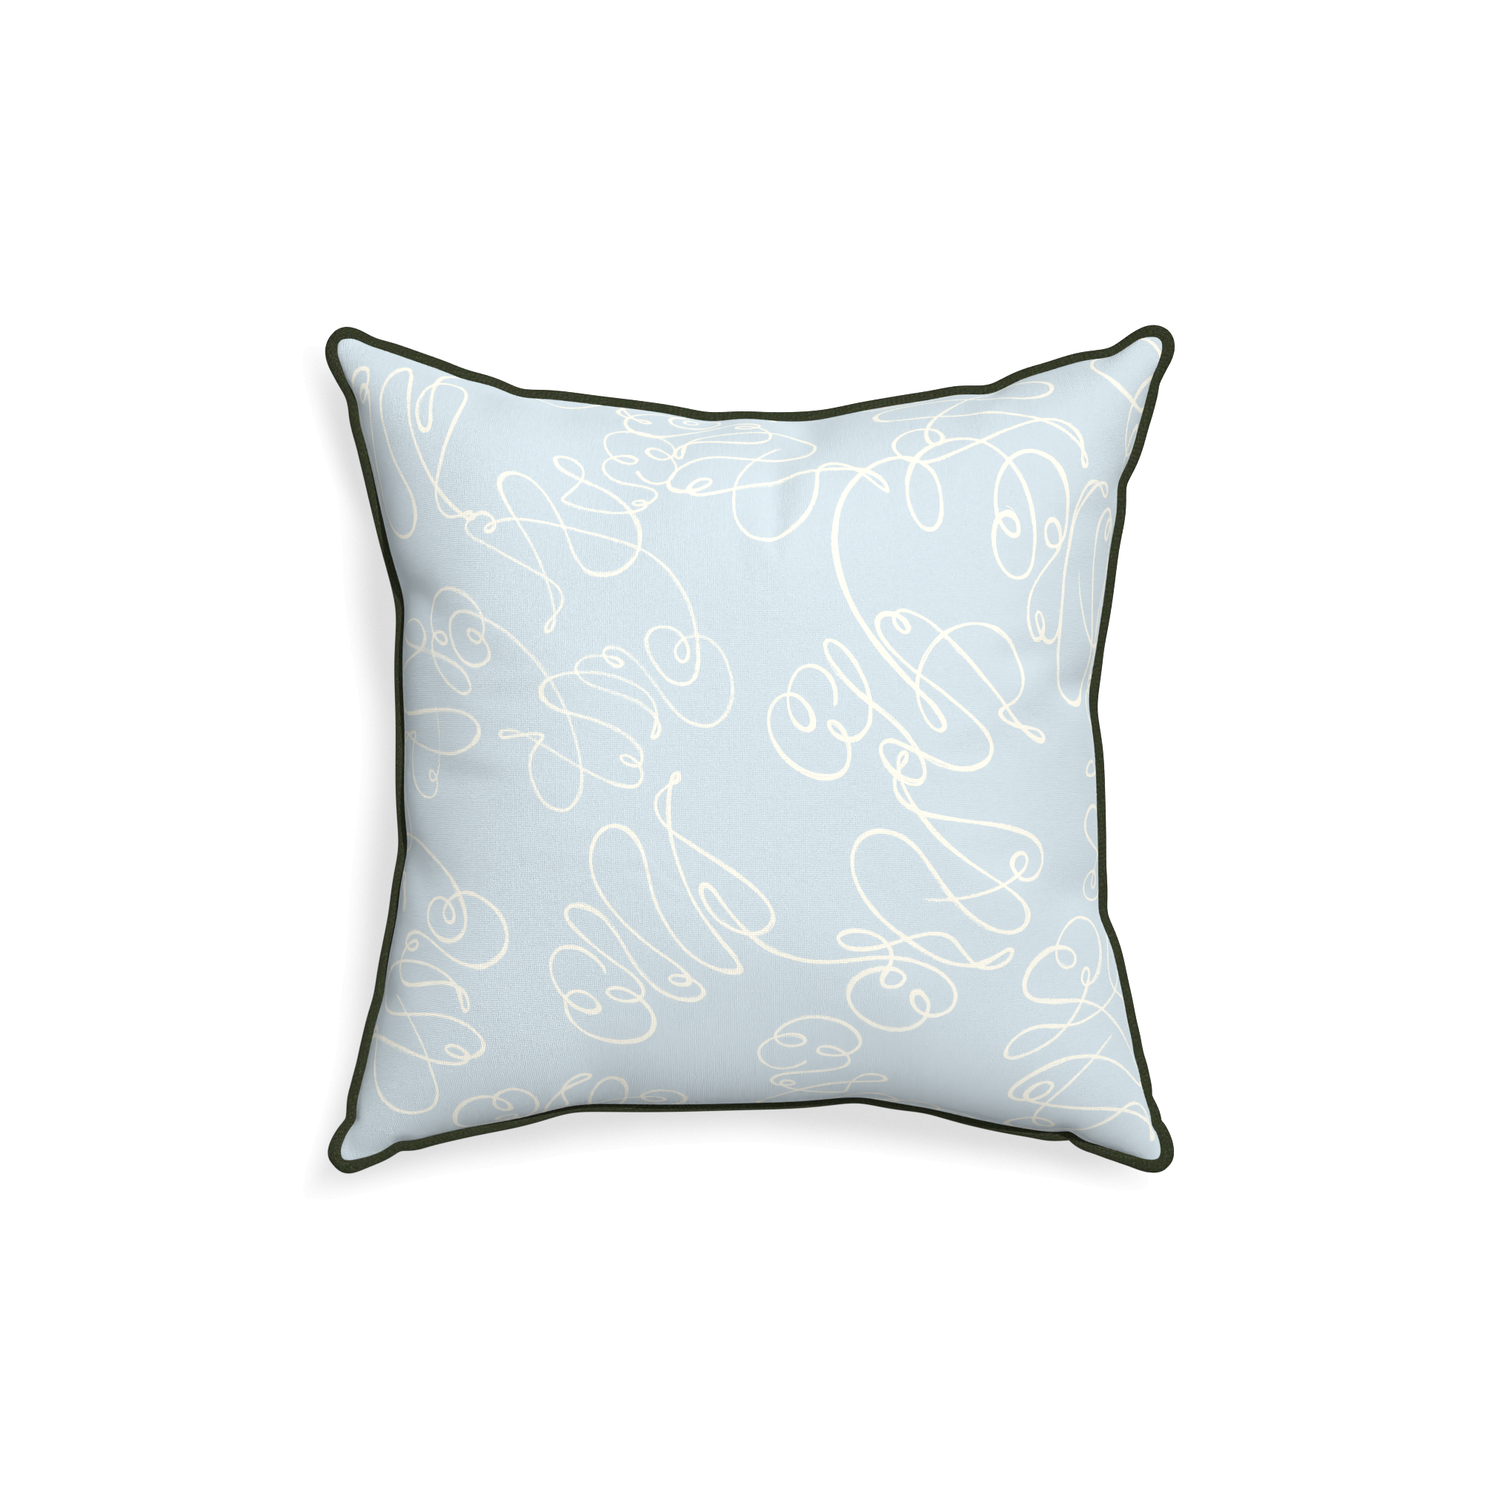 18-square mirabella custom powder blue abstractpillow with f piping on white background